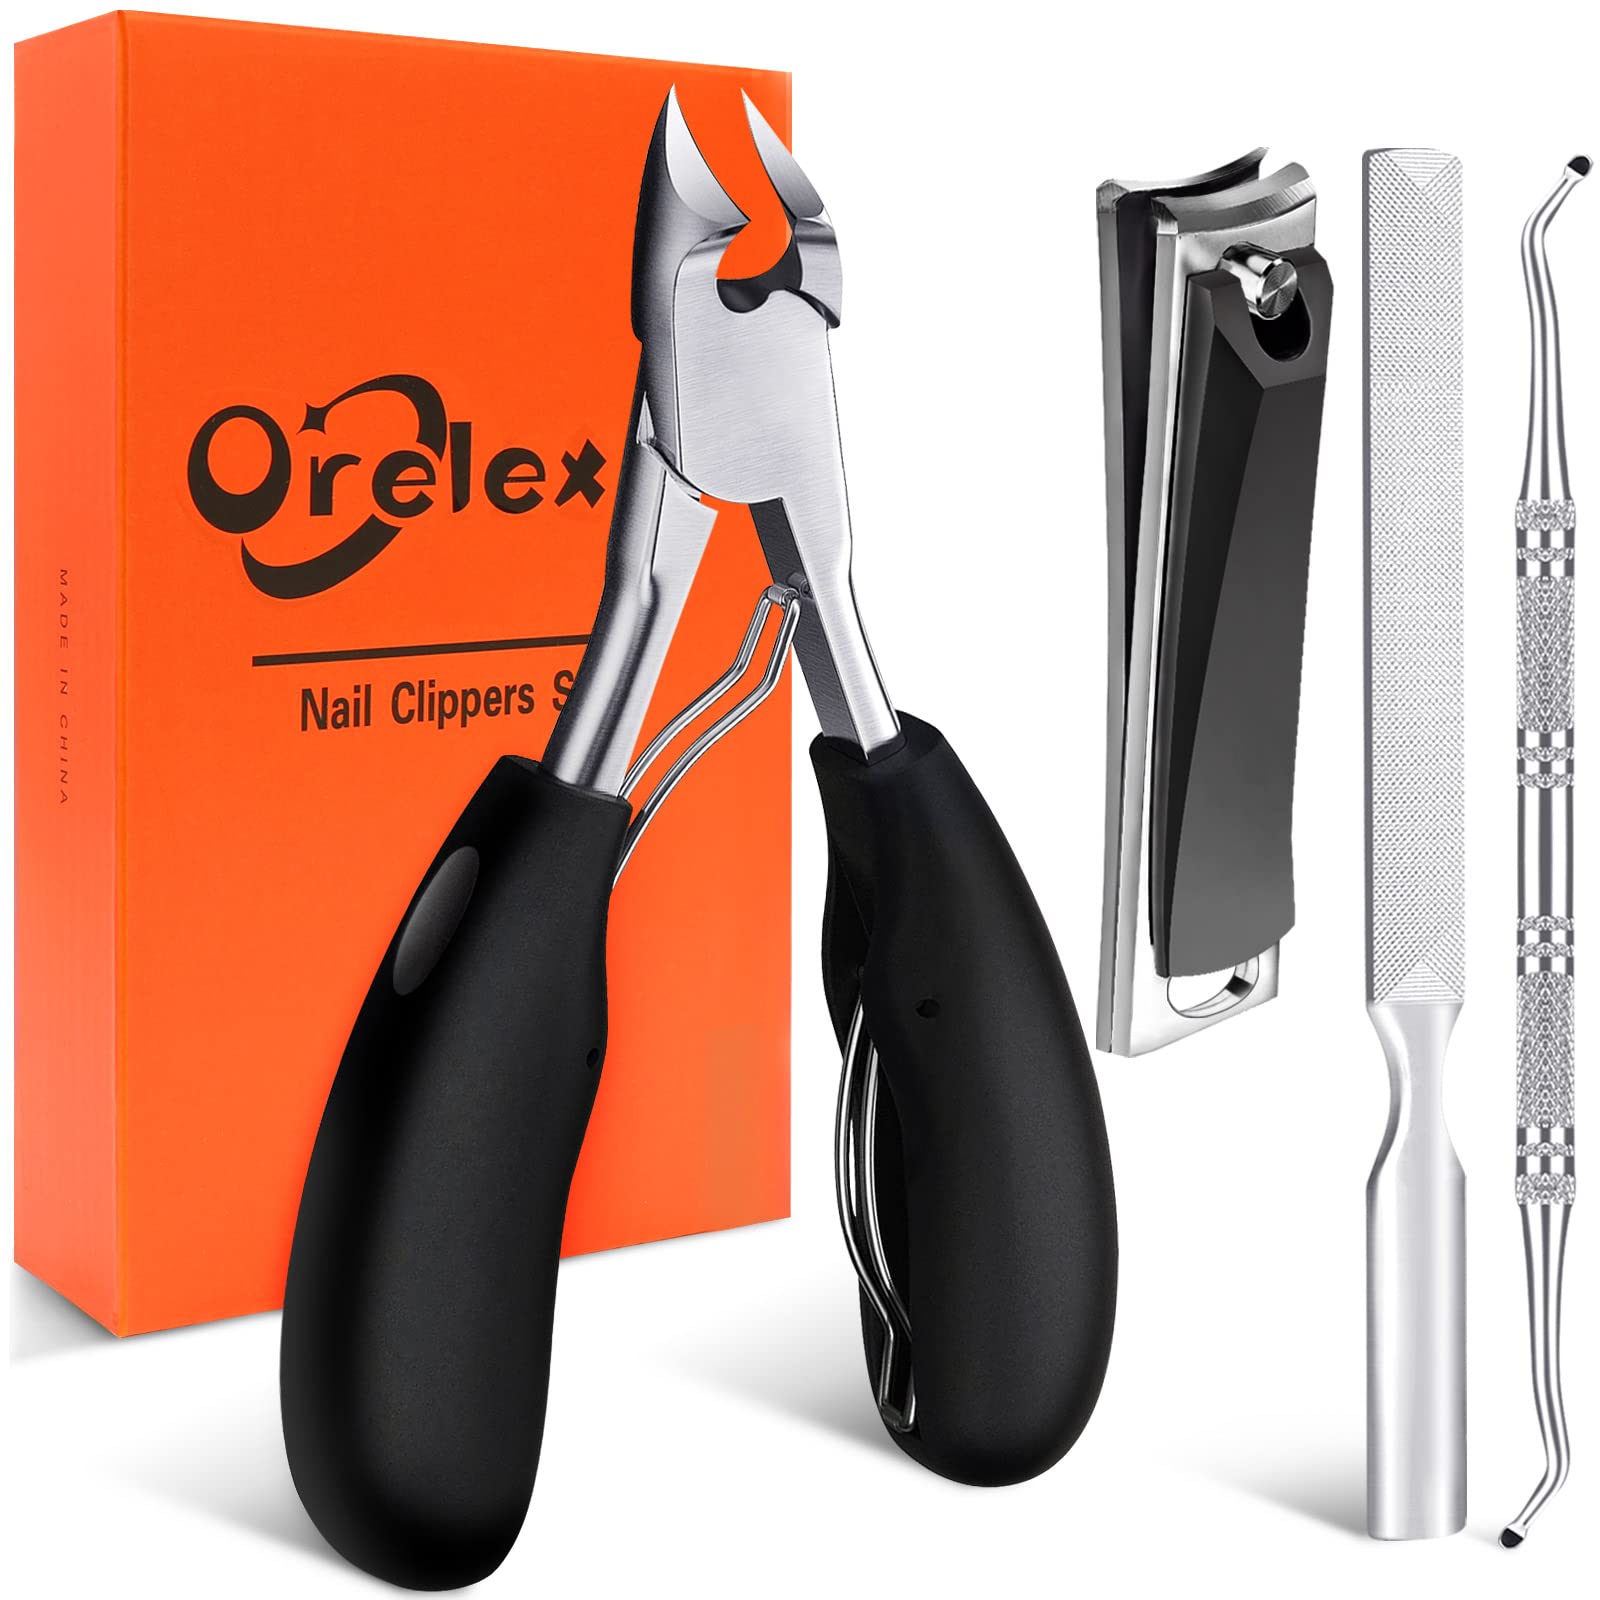 Orelex Toenail Clippers, Toe Nail Clippers for Thick Nails, Have Duty Nail  Clipper Fingernail Clippers for Thick Nails,Seniors, Men, Women, Super  Sharp Curved Blade Grooming Tool Grey+black